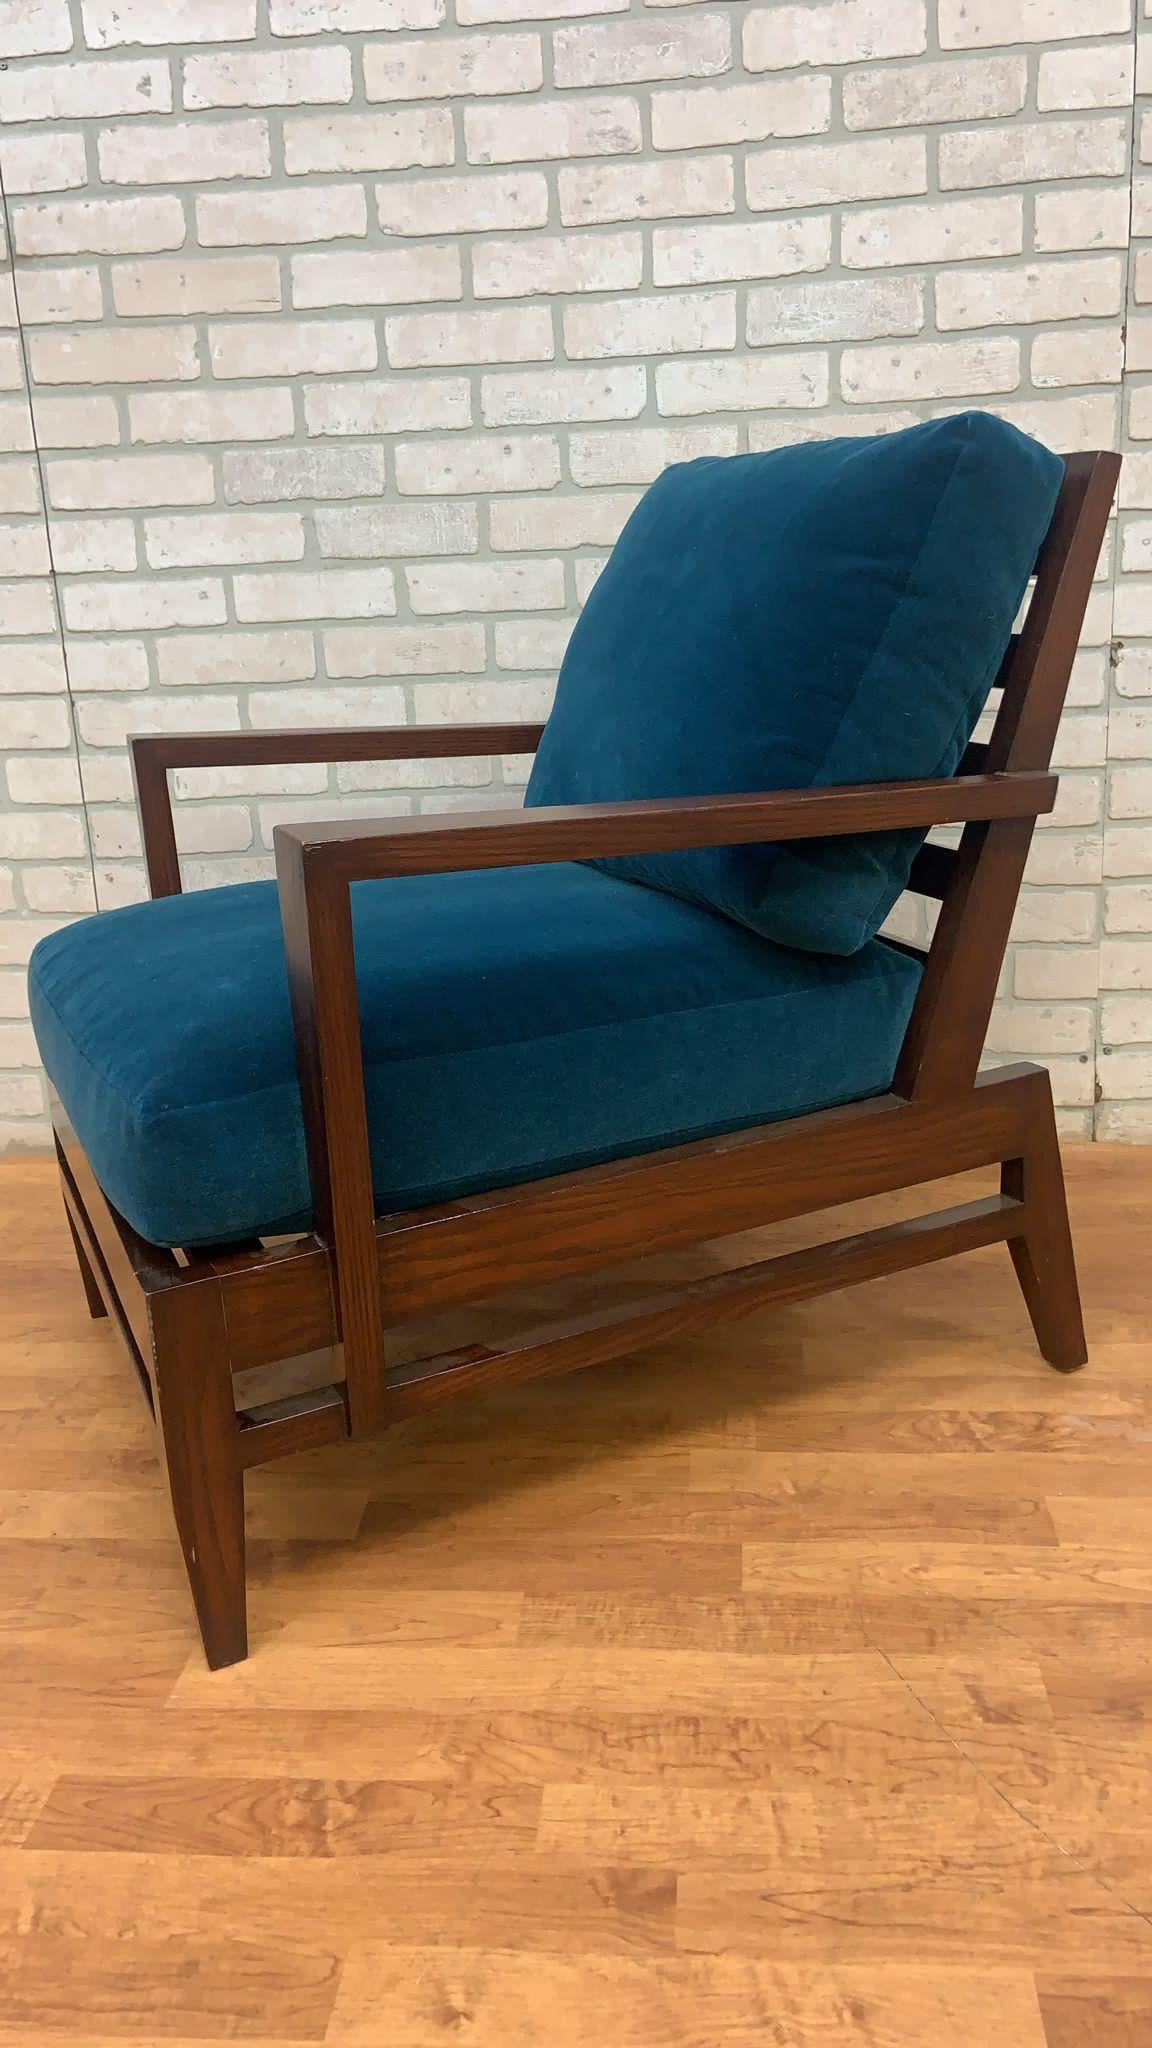 Vintage French René Gabriel Cherry Wood Slat Back Lounge Chair in Teal Mohair For Sale 3